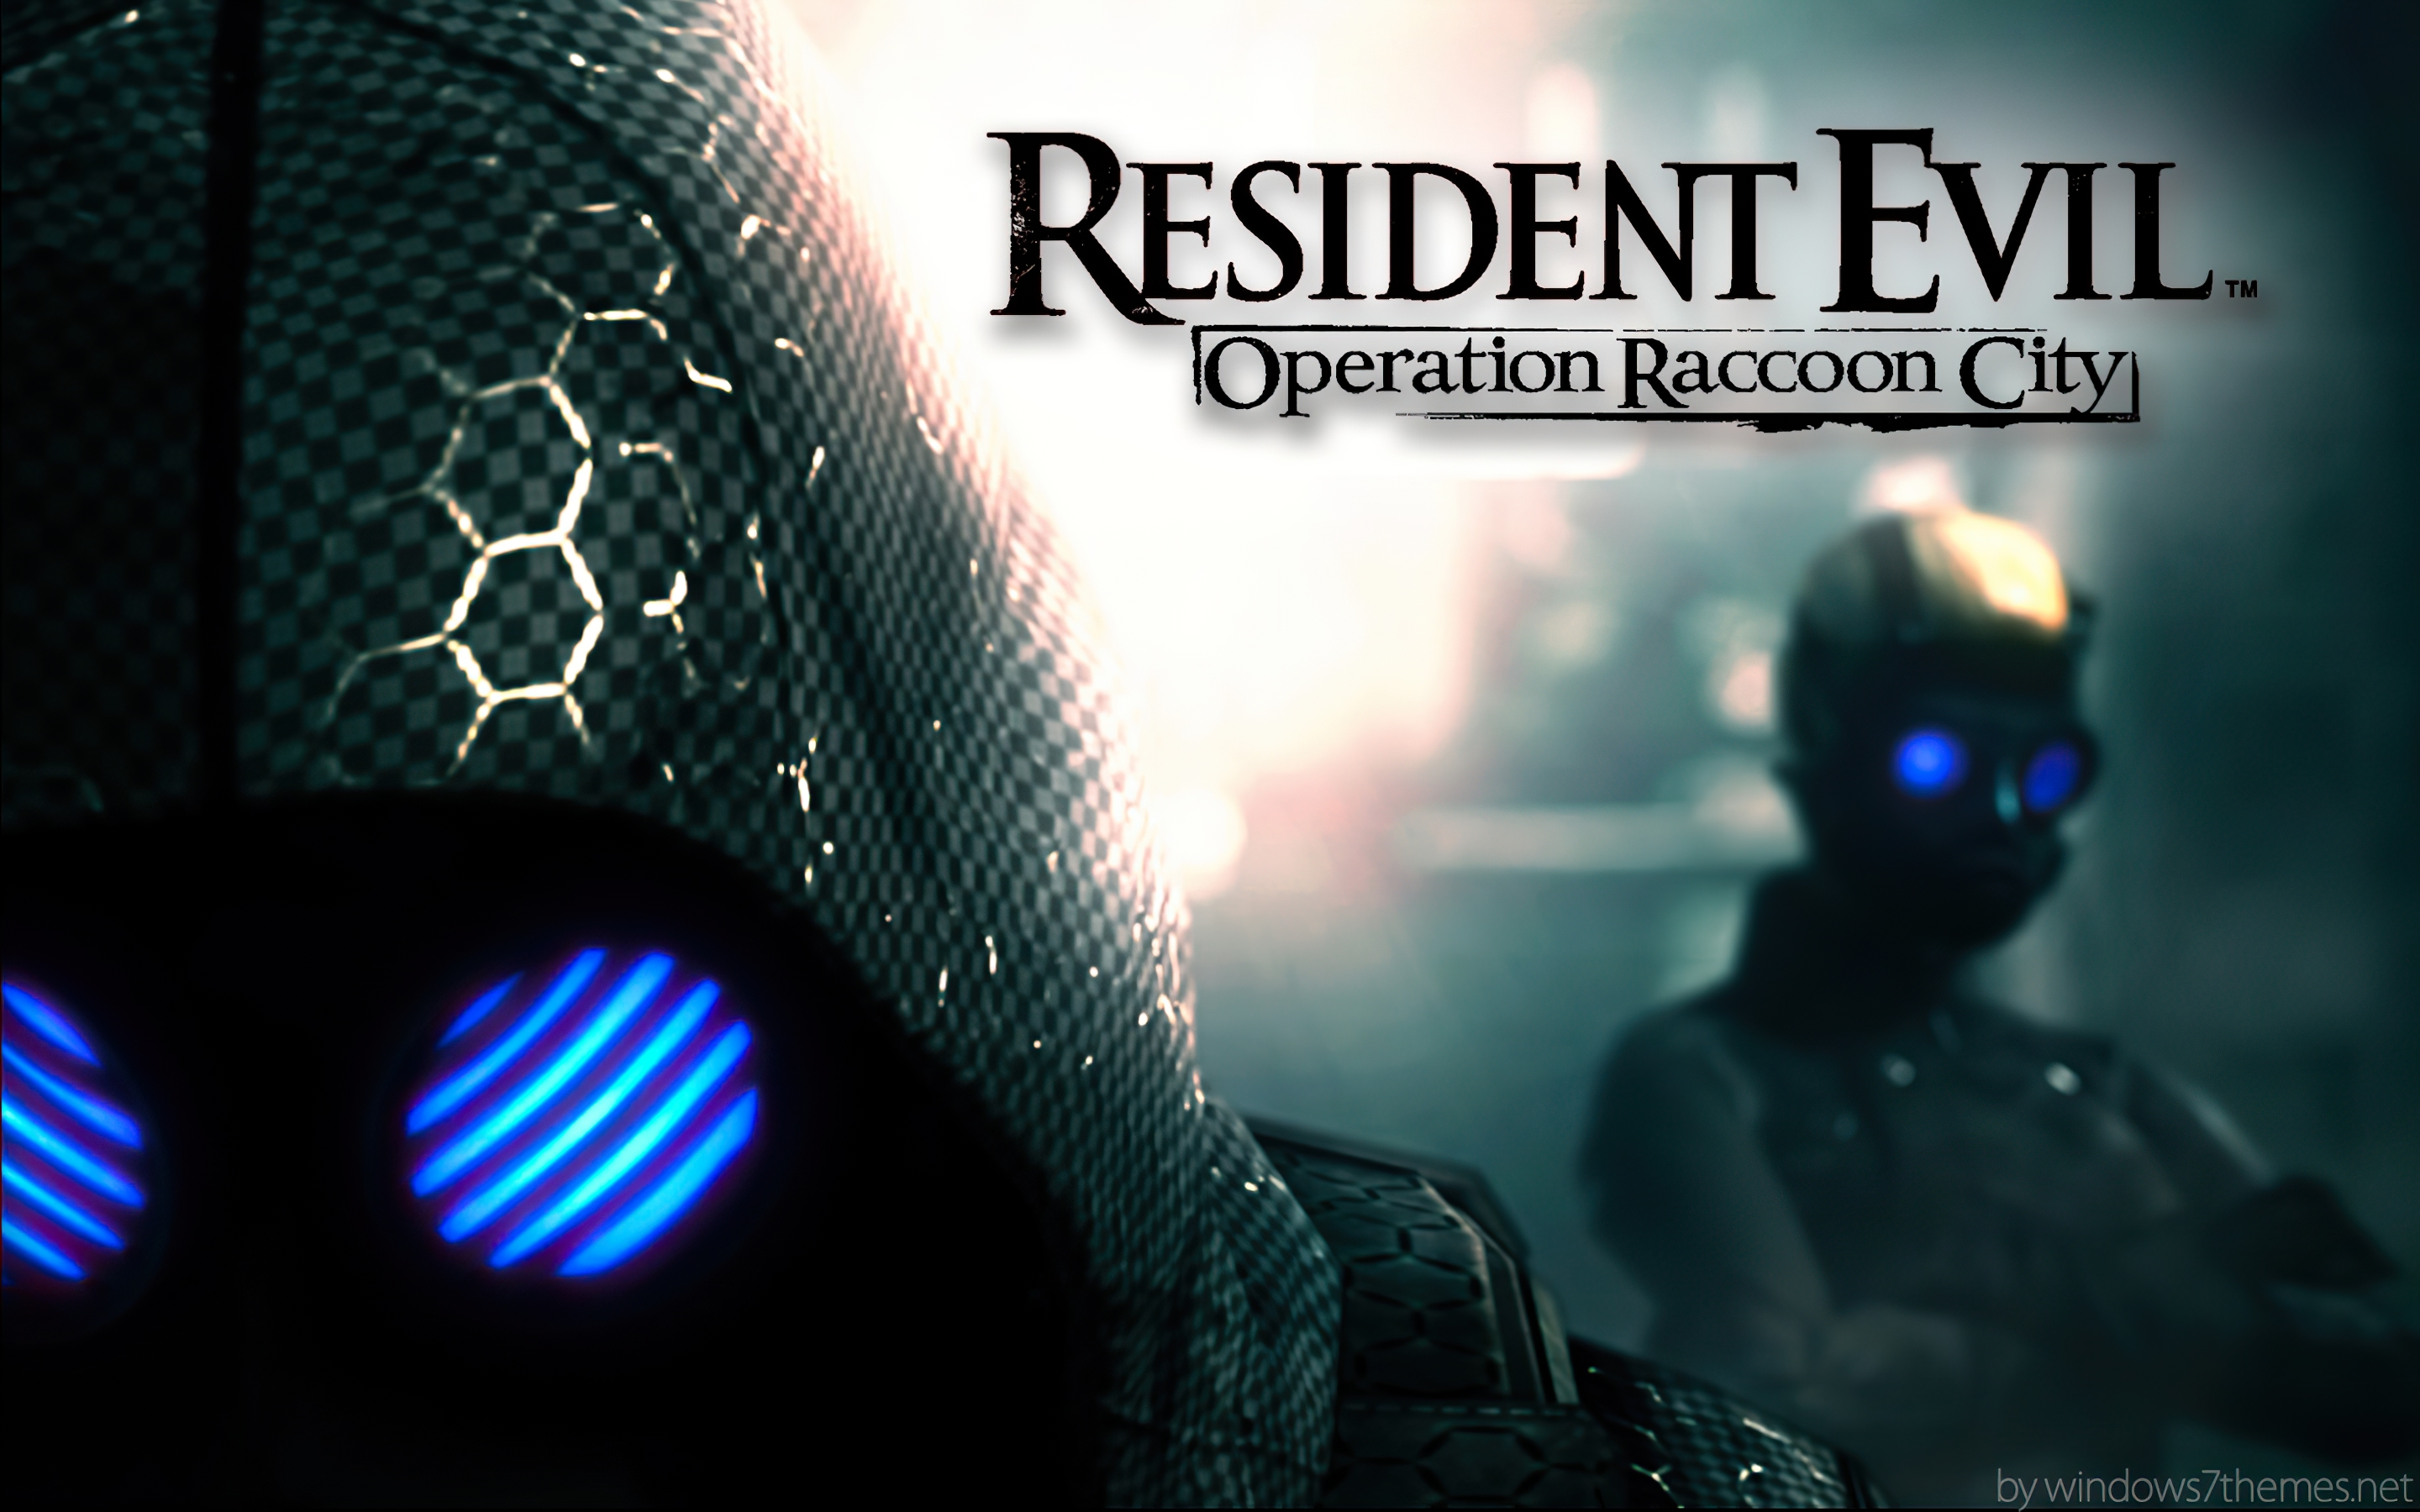 Video Game Resident Evil Operation Raccoon City 2880x1800